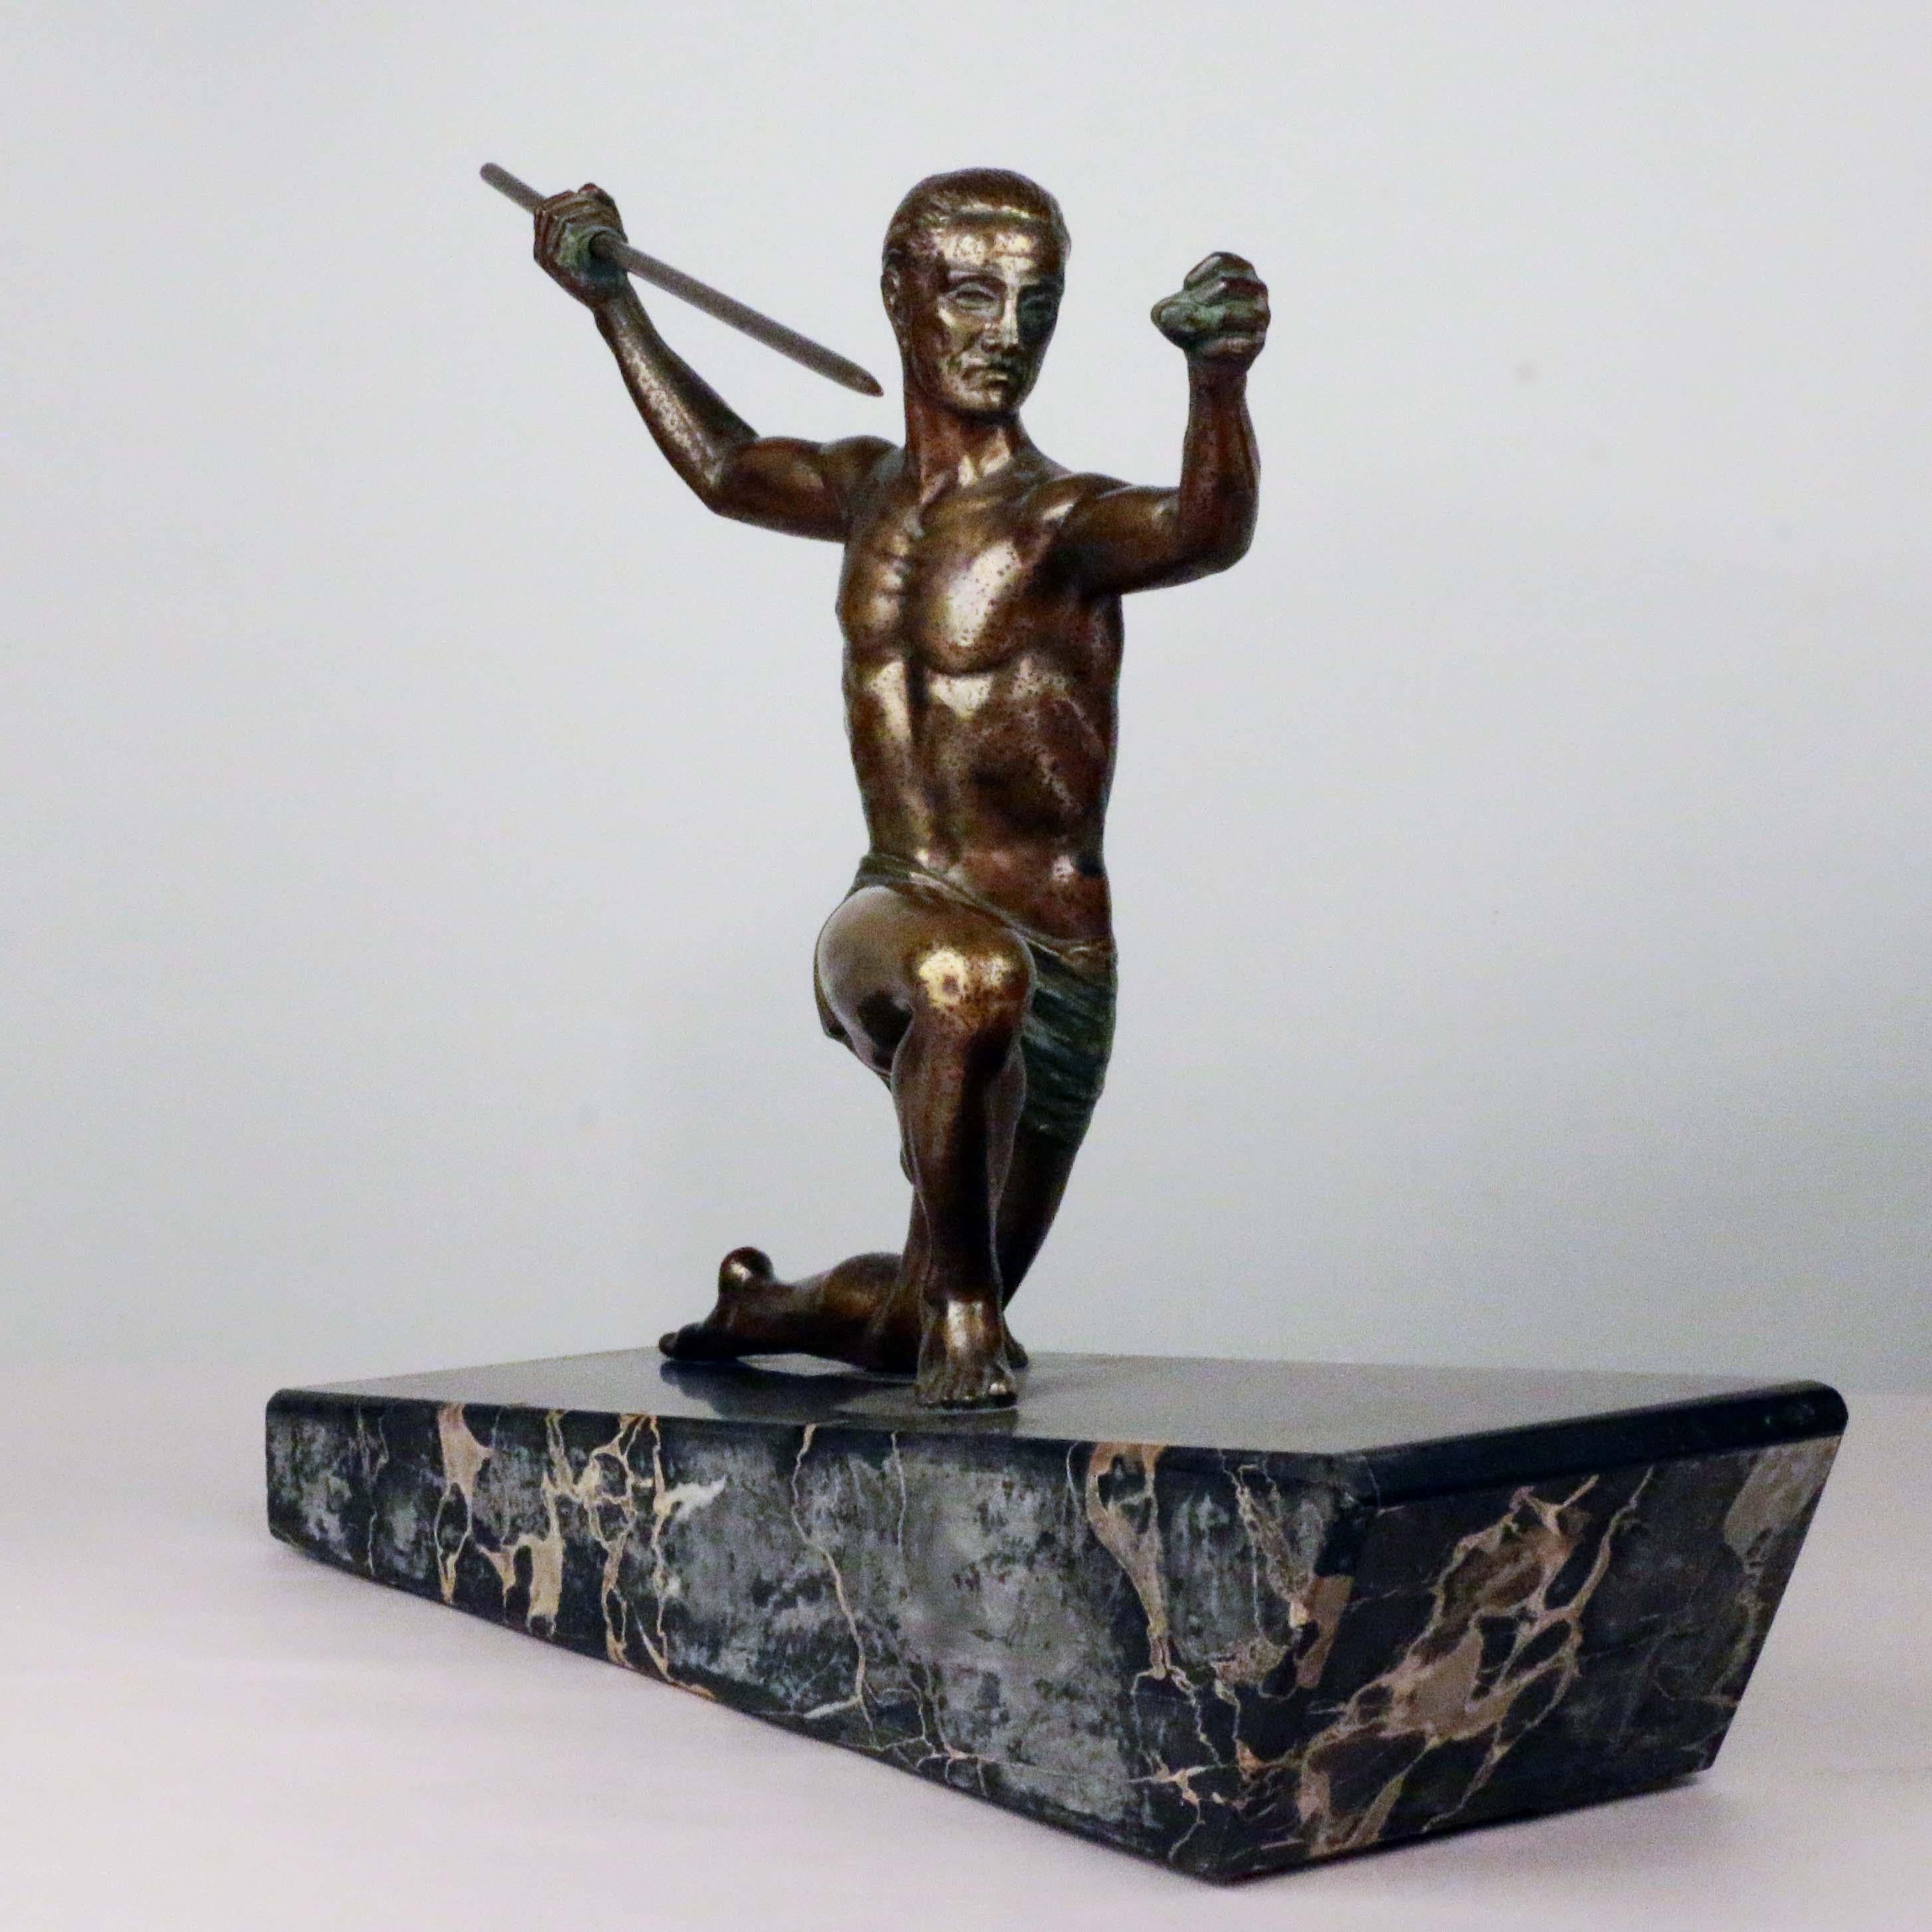 Art Deco patinated and polychrome painted bronze of kneeling javelin thrower on black marble and slate base, signed H. Molins on rear leg.

Enrique Molins-Balleste was born in Barcelona, a Spanish artist who later moved to Paris. It would appear